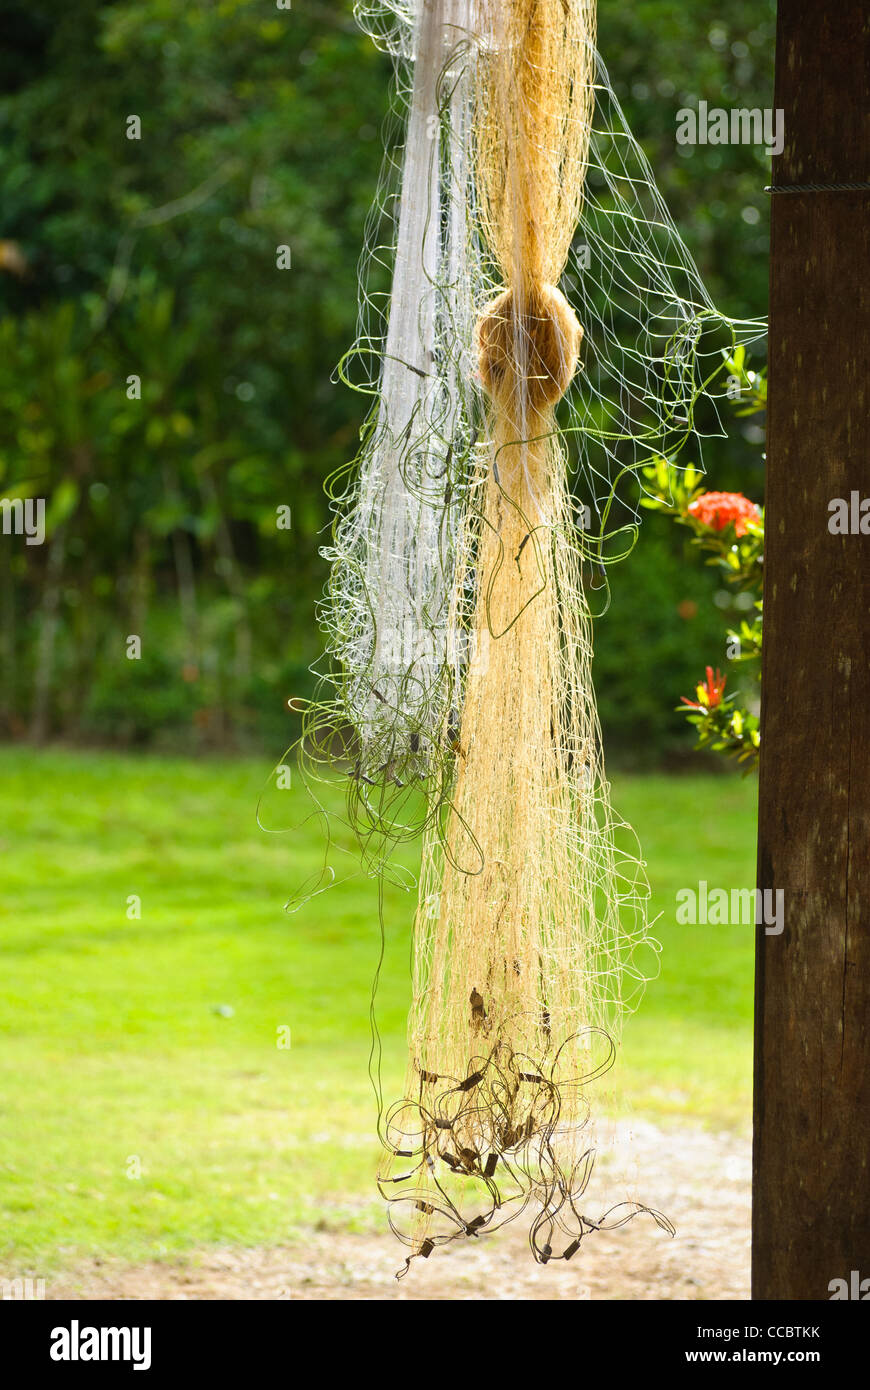 Fishing net hanging in a house showing the way of living of the people who live here. Stock Photo